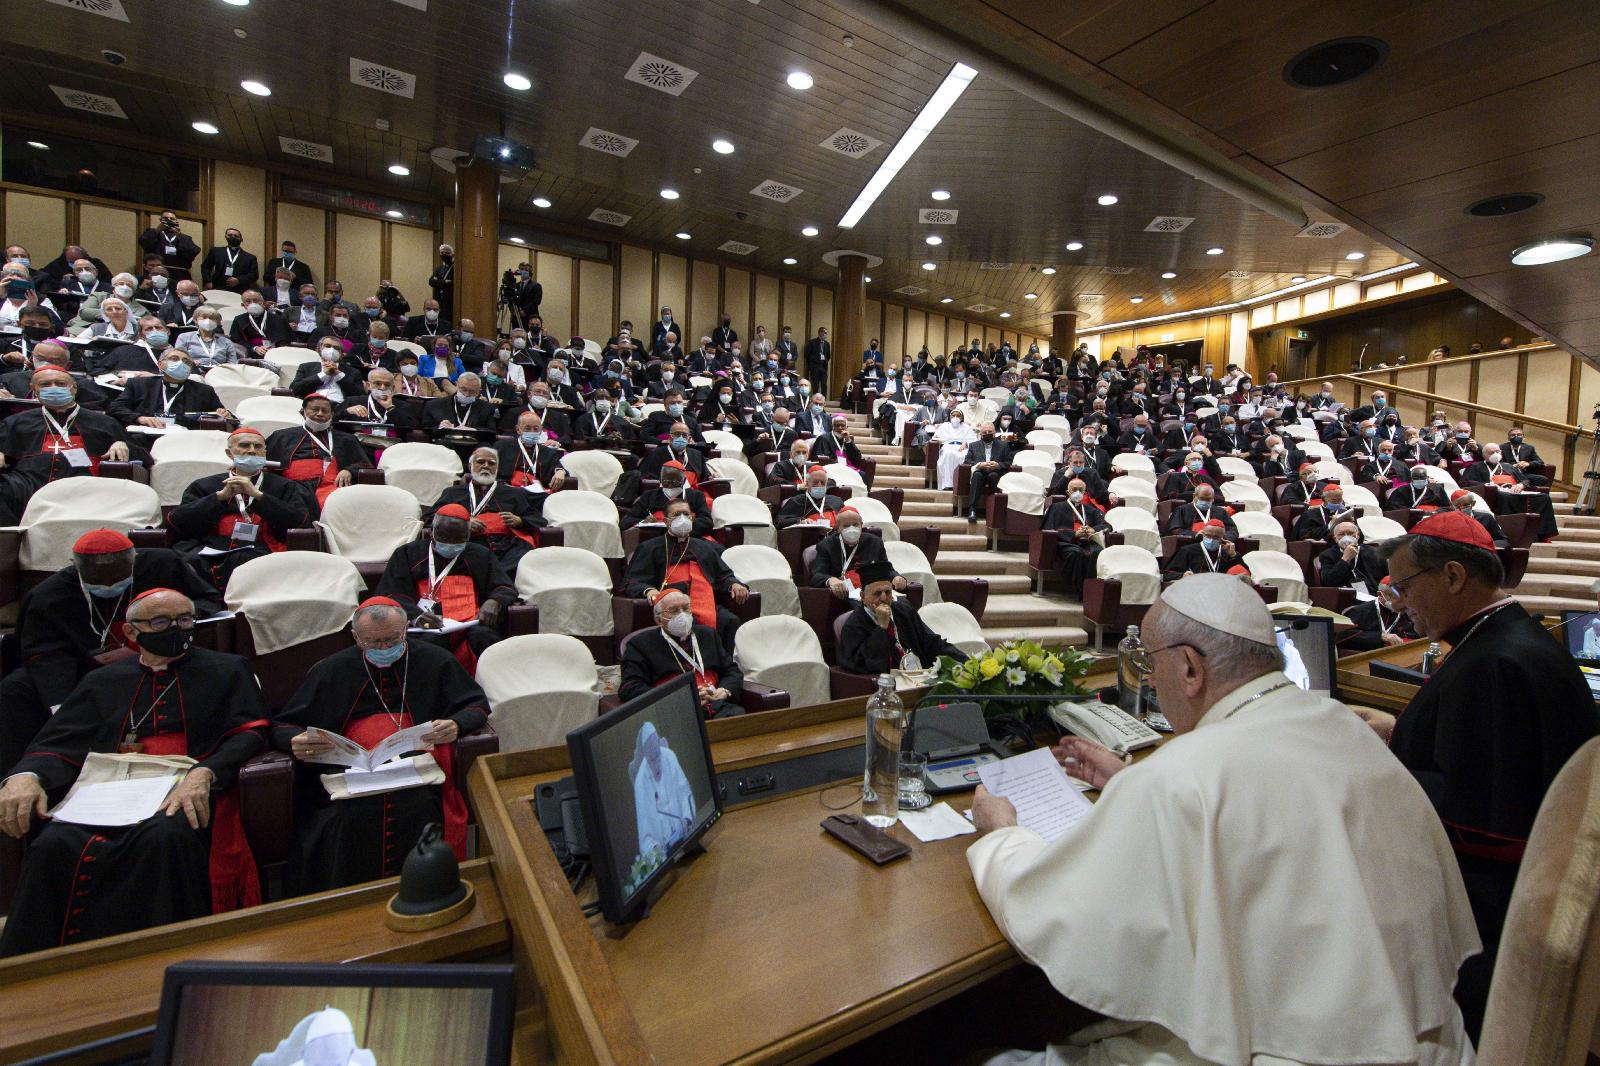 Robust synodal reports stand witness to the courage of participants in the process